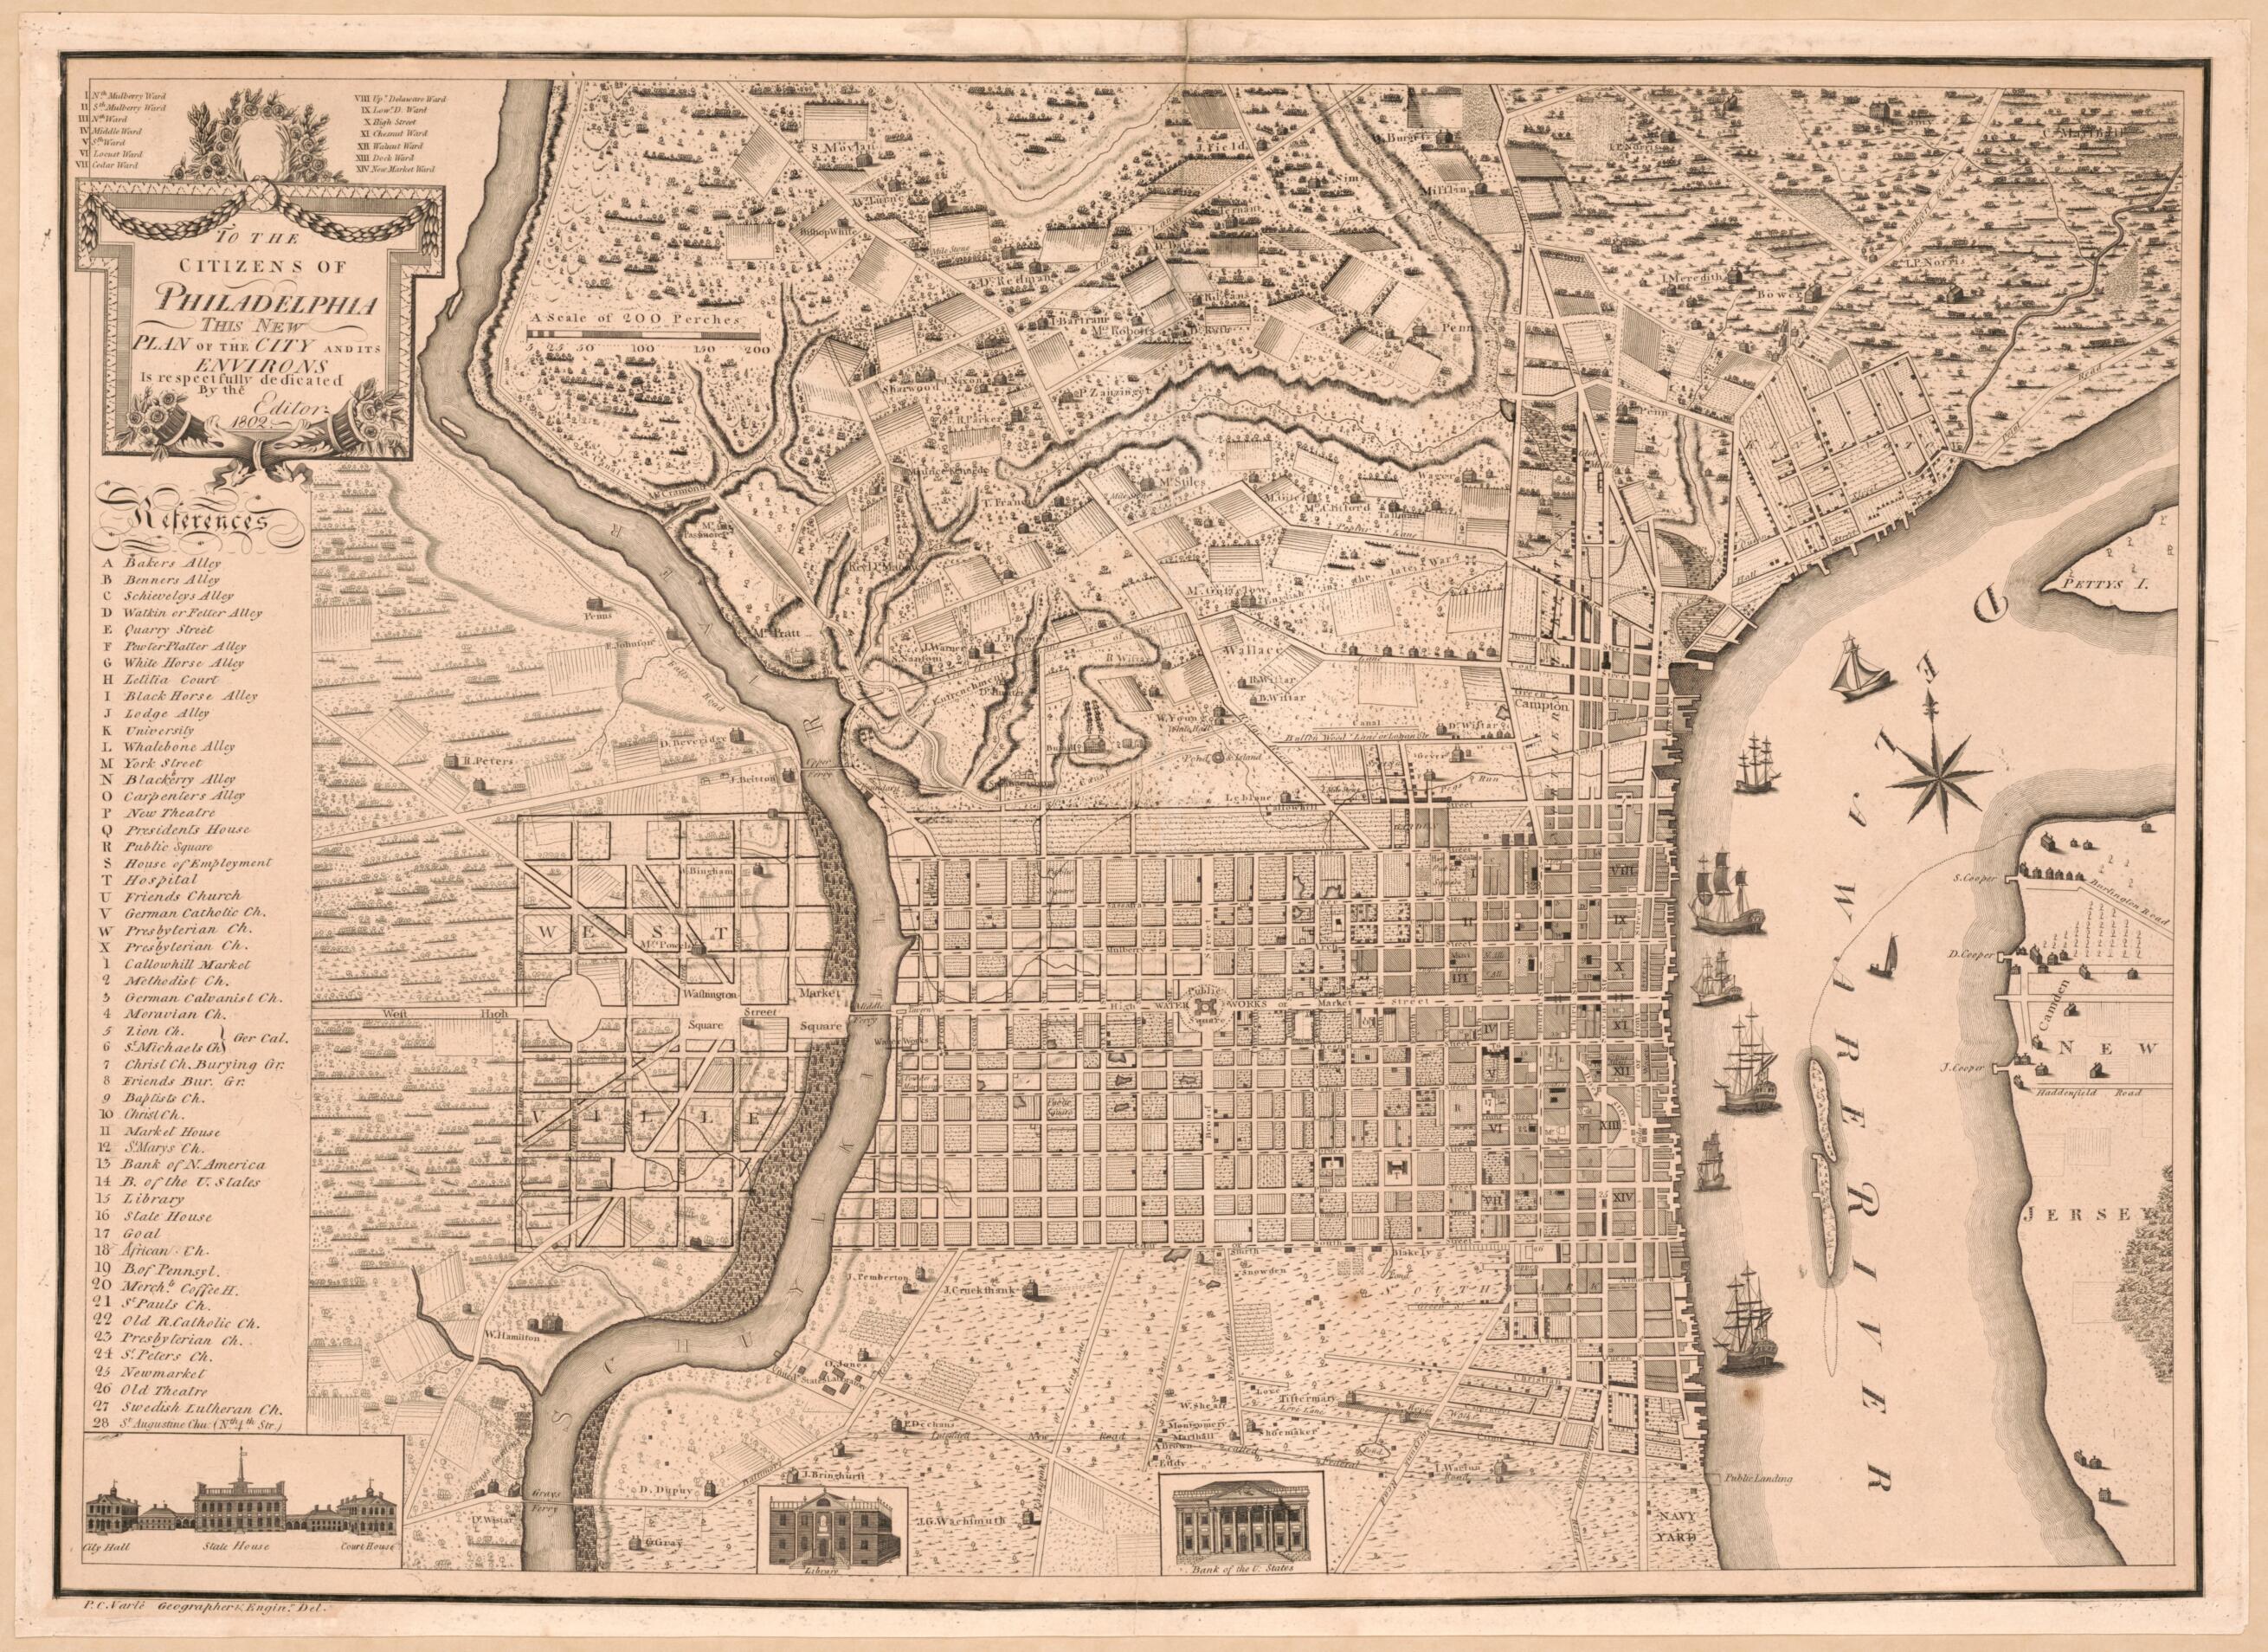 This old map of To the Citizens of Philadelphia, This New Plan of the City and Its Environs Is Respectfully Dedicated by the Editor from 1802 was created by Charles Varle in 1802